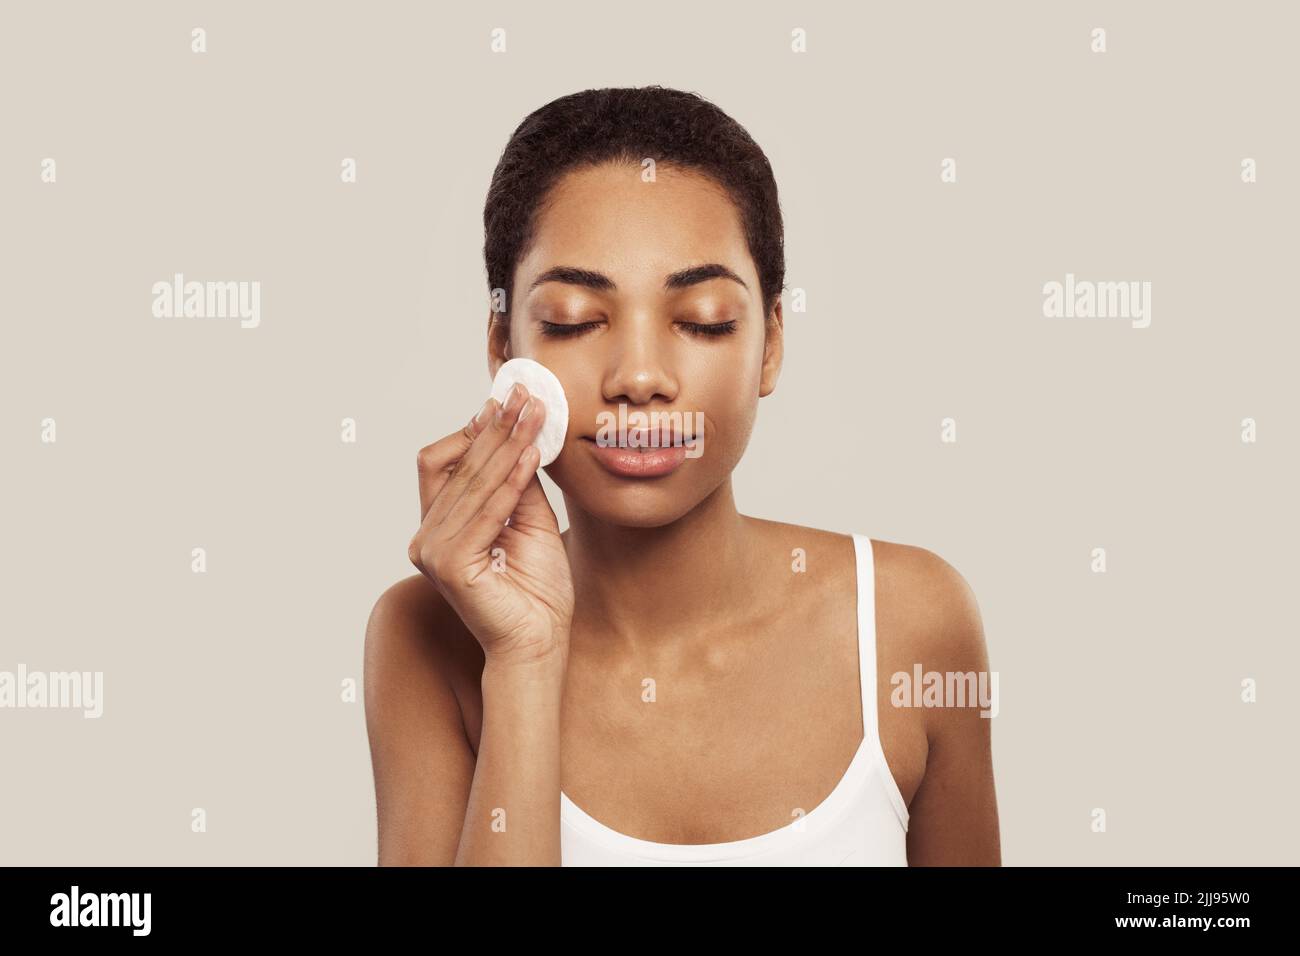 Black smiling woman remove make up with white cotton pad Stock Photo